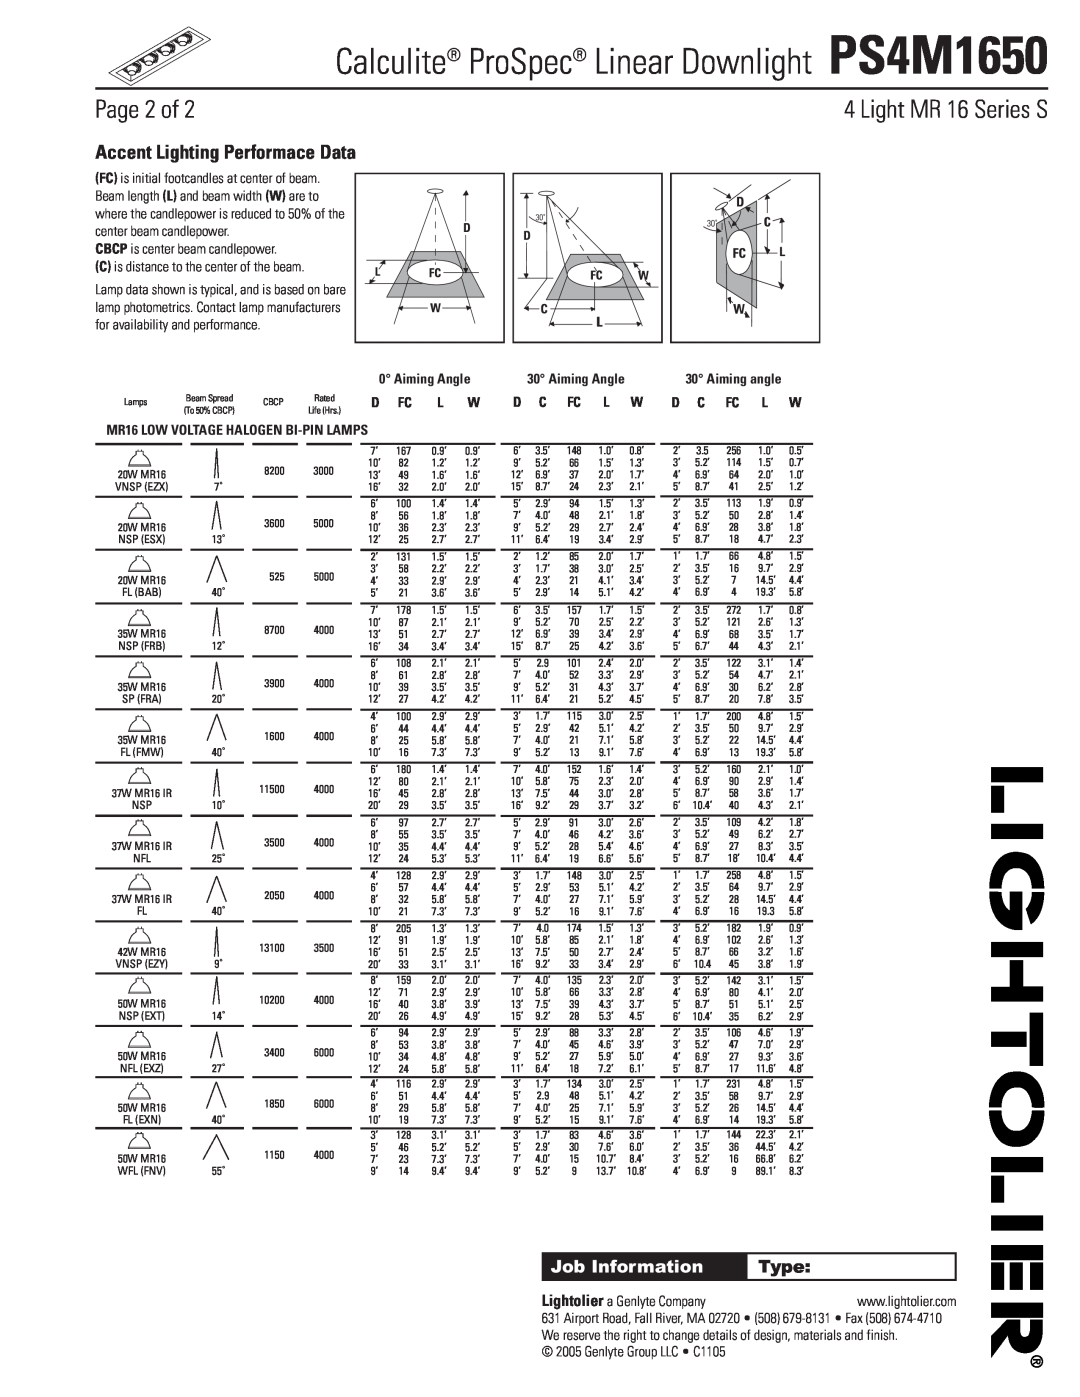 Lightolier PS4M1650 Page 2 of, Accent Lighting Performace Data, Aiming Angle, MR16 LOW VOLTAGE HALOGEN BI-PINLAMPS, Type 